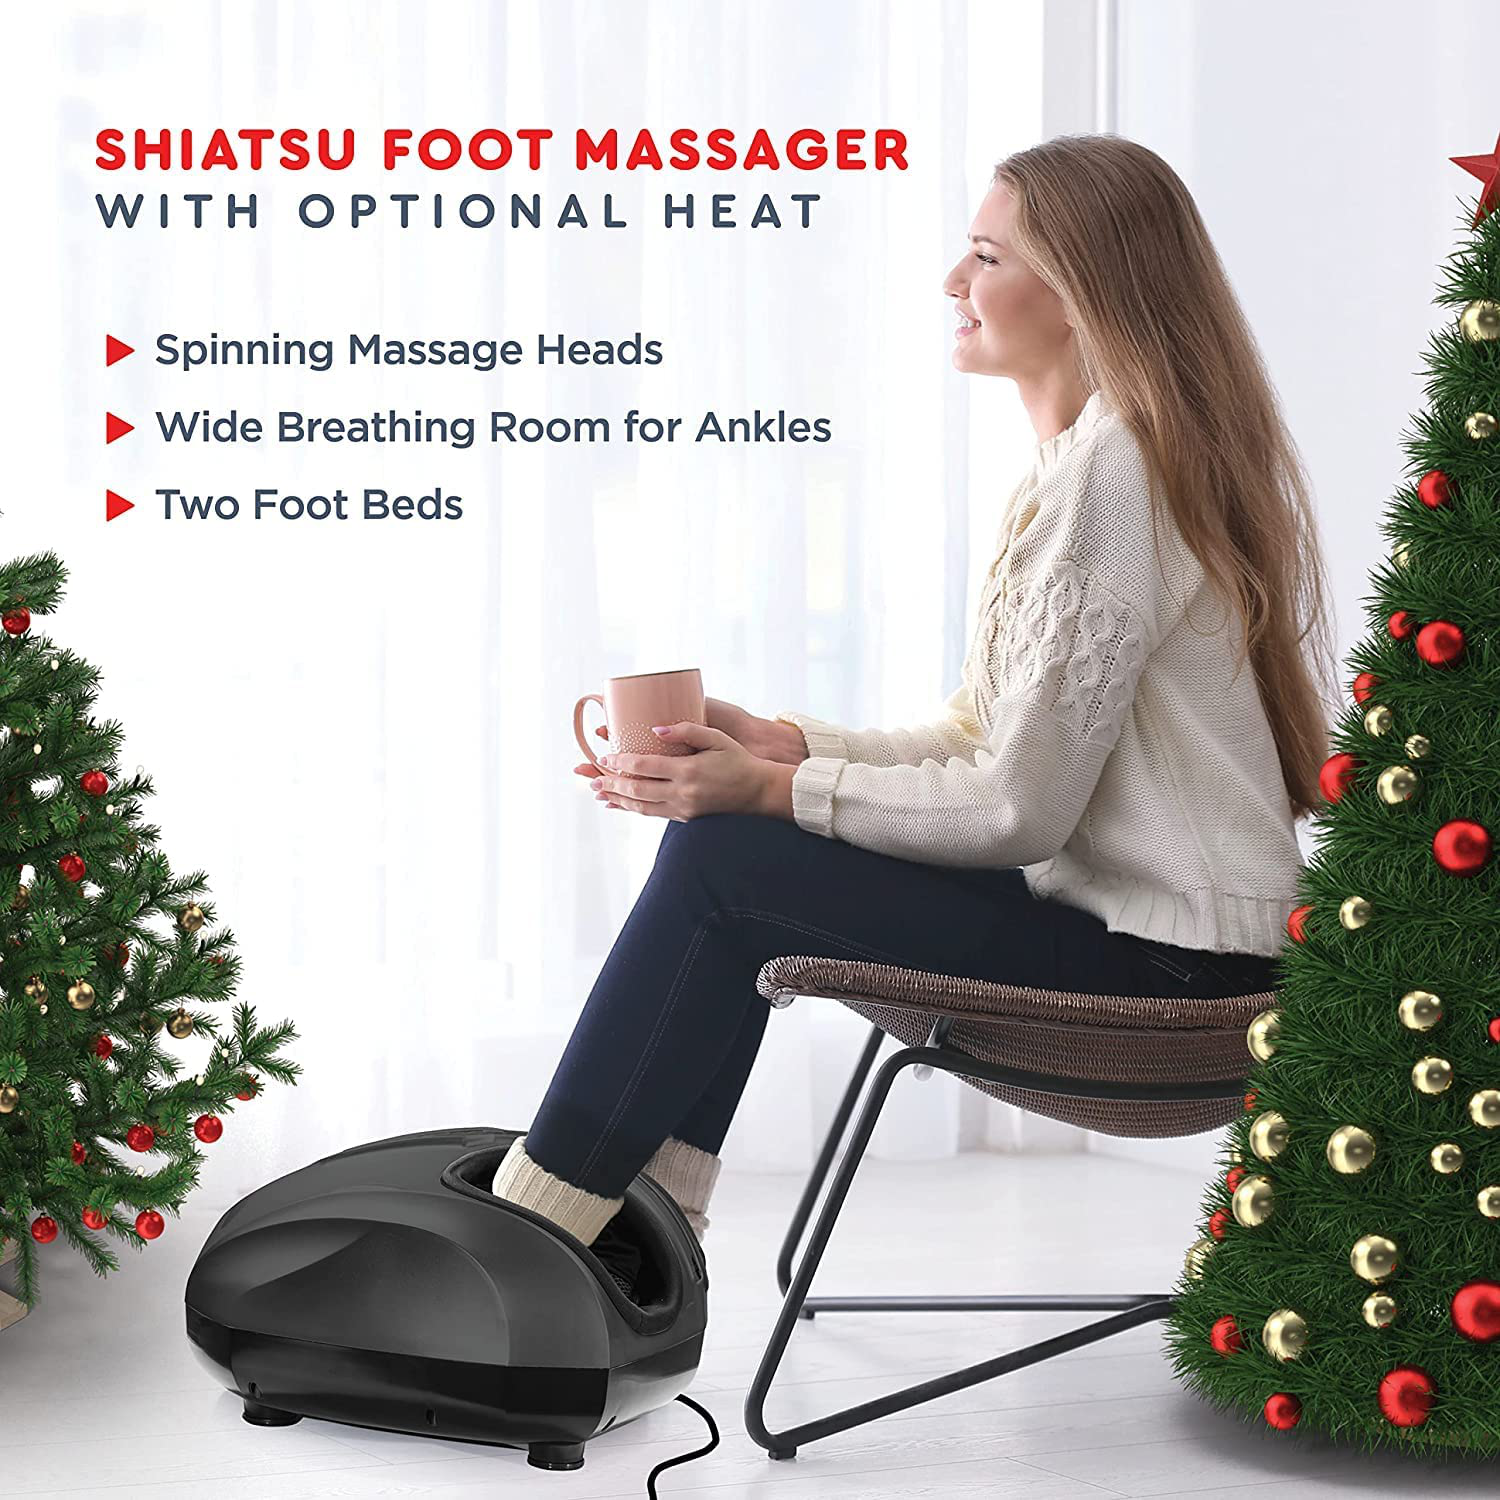 Shiatsu Foot Massager Machine - Plantar Fasciitis Relief with Heat Therapy, Foot Massagers for Neuropathy Pain and Circulation, Feet Massager for Pain Relief, Best Christmas Gift for Women Men Mom Dad